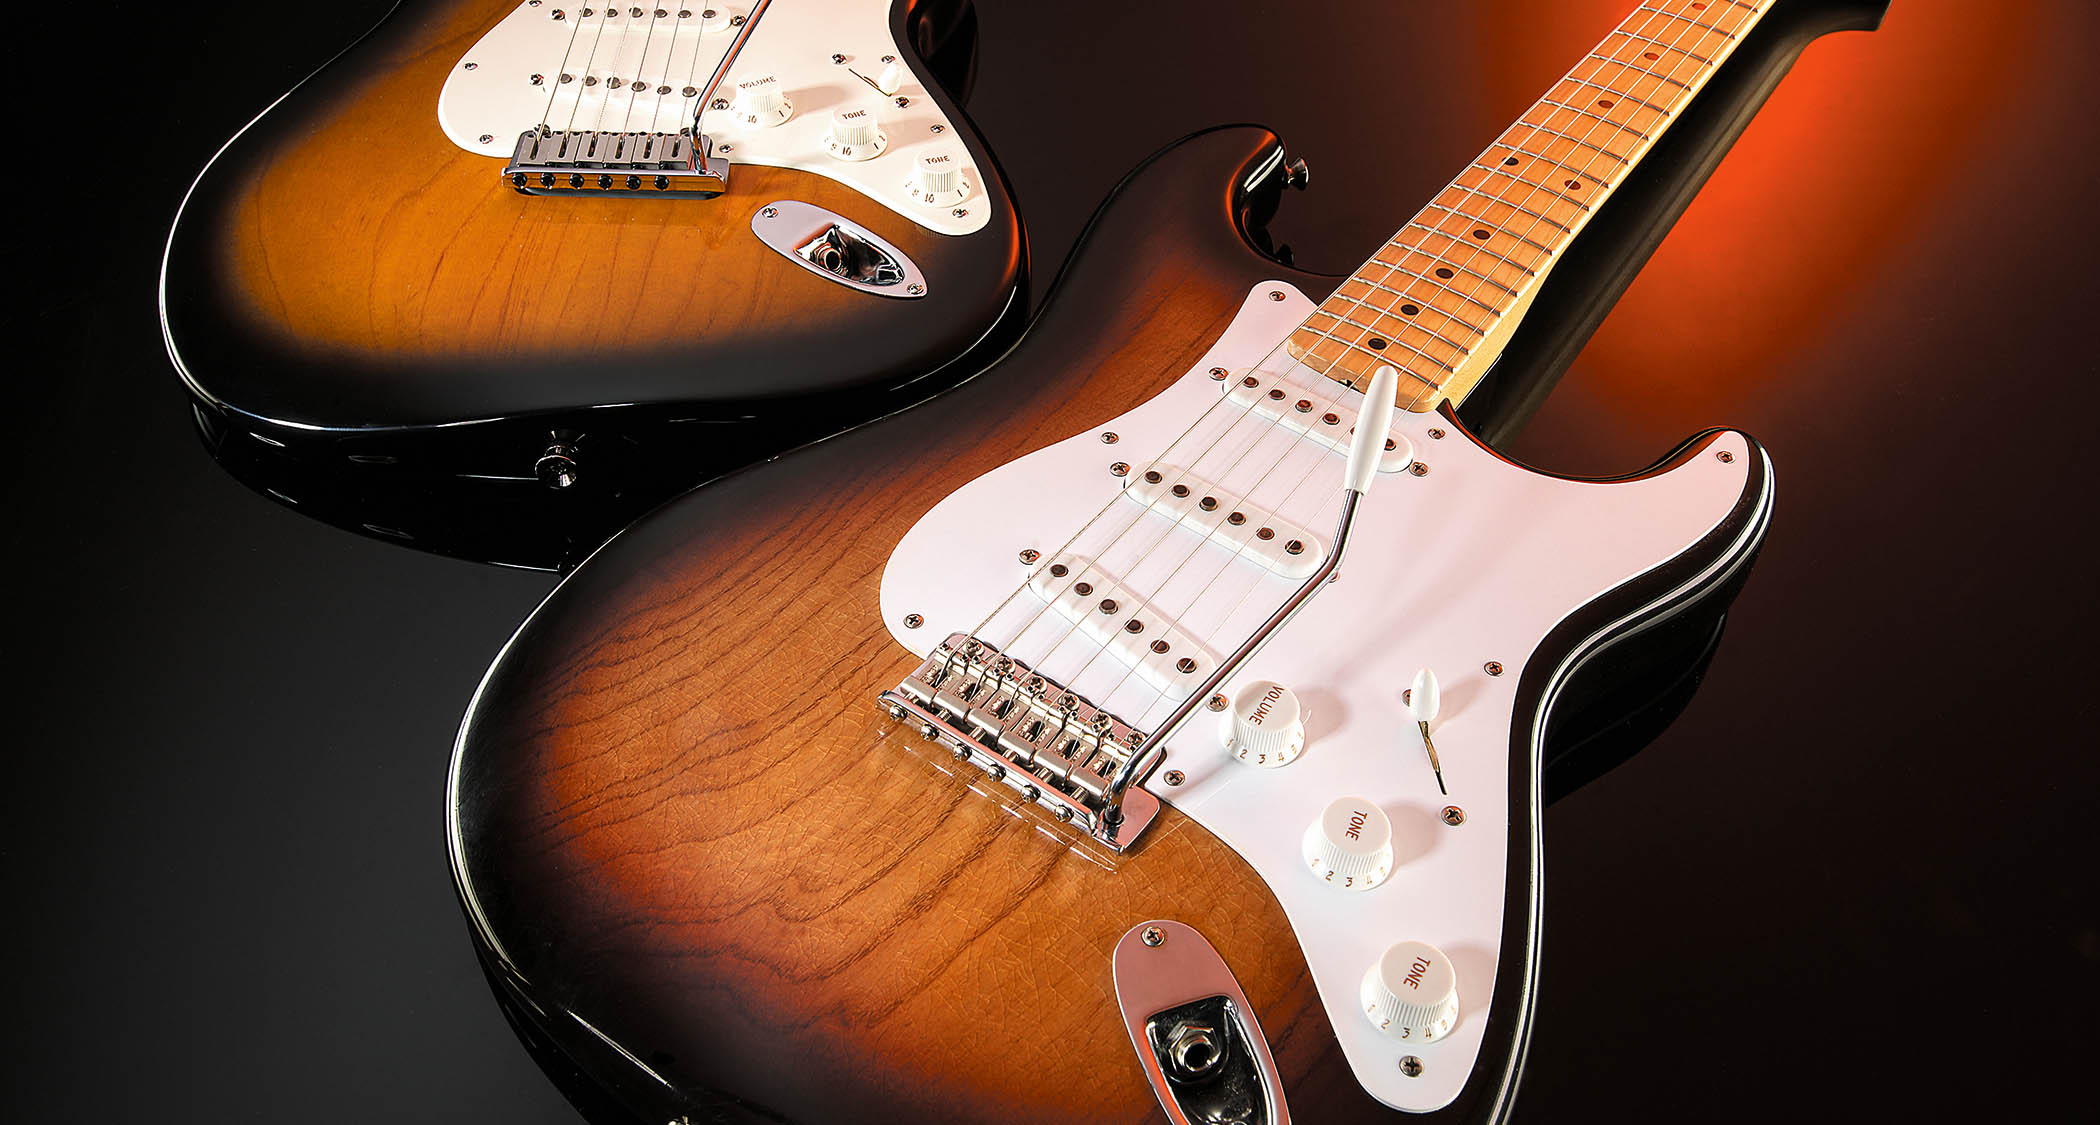 “No guitar has shaped popular culture like the Strat”: How the Fender Stratocaster ushered in an evolution in guitar design – and a revolution in guitar music